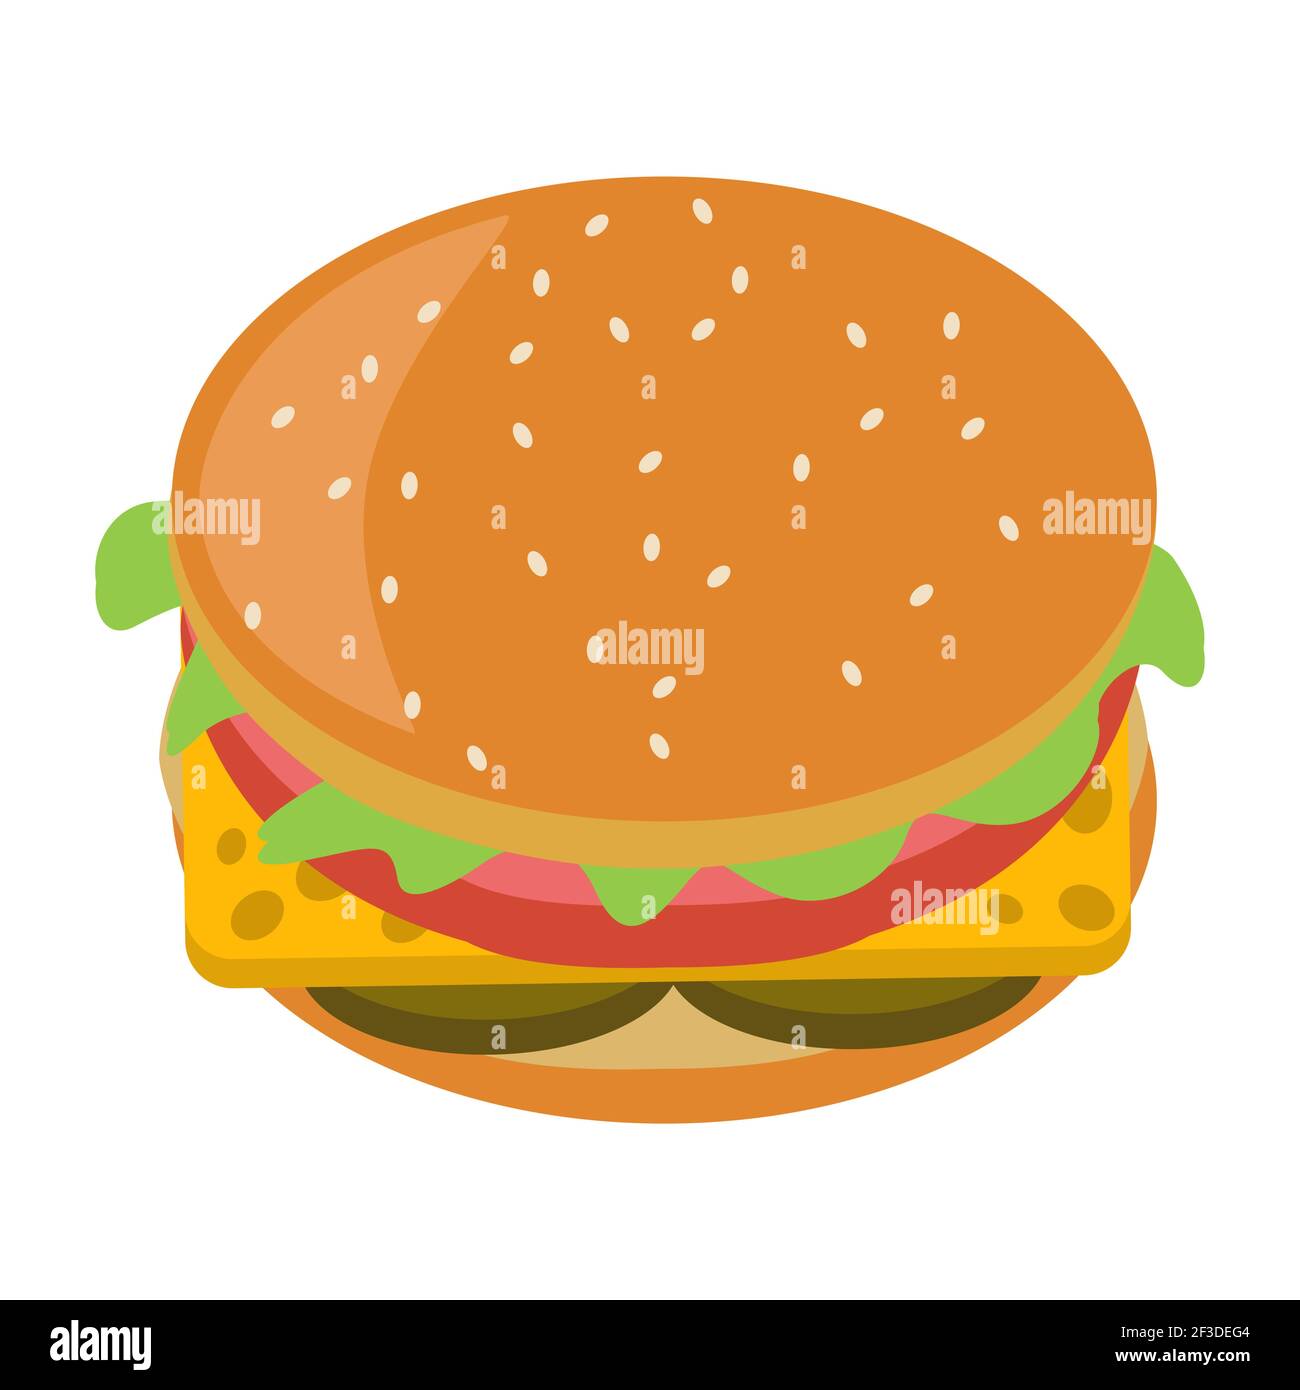 Burger icon. Vector illustration flat icon juicy delicious hamburger isolated on white background. Stock Vector